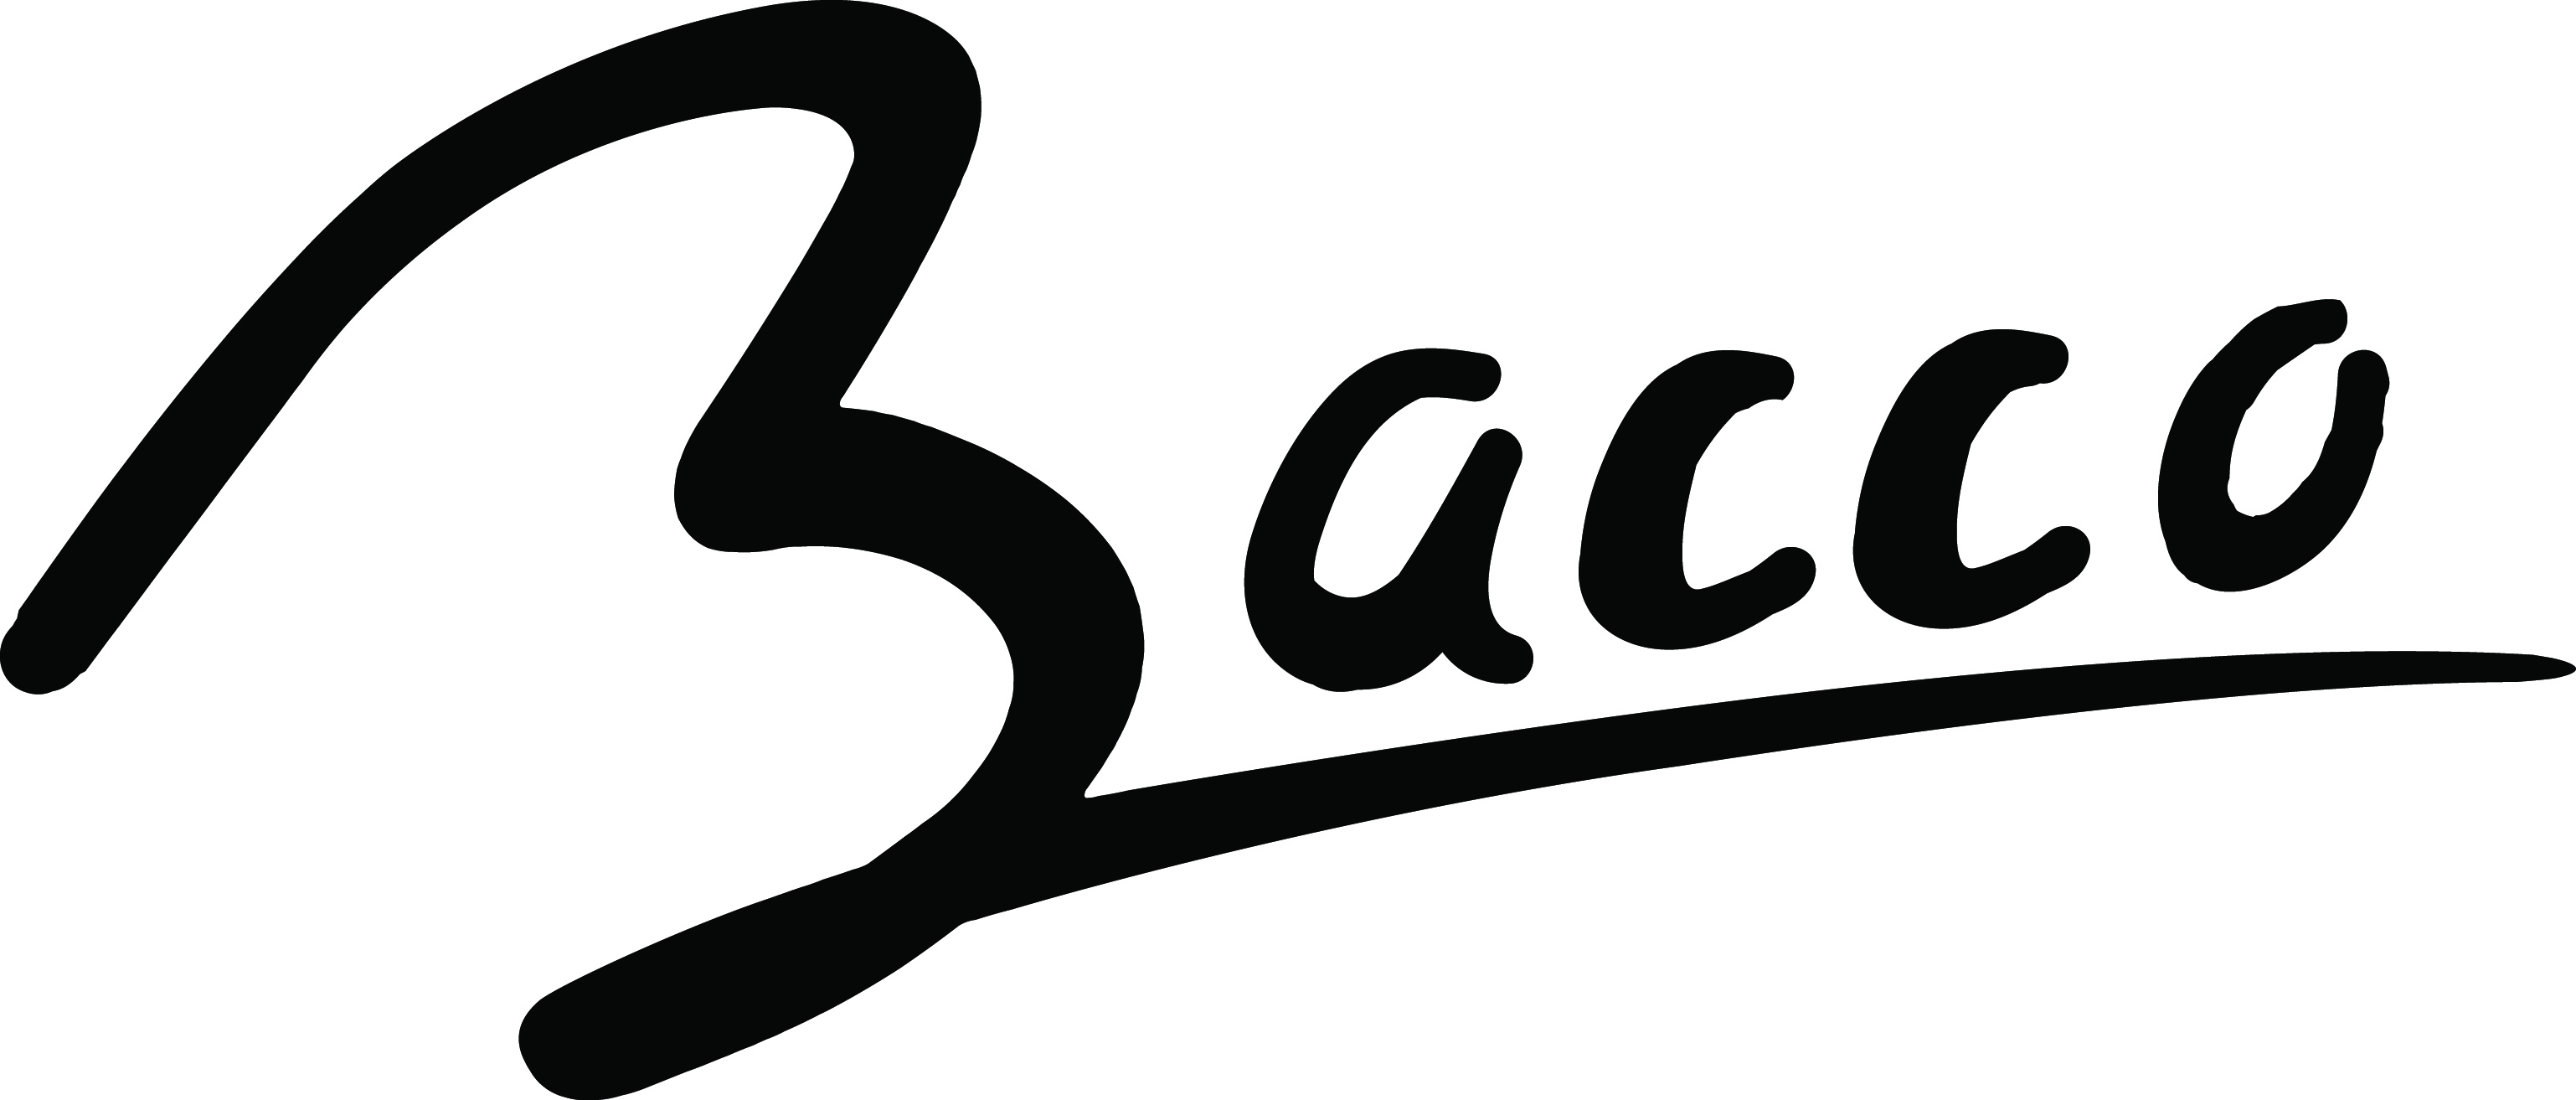 Bacco Pizzeria and Wine Bar